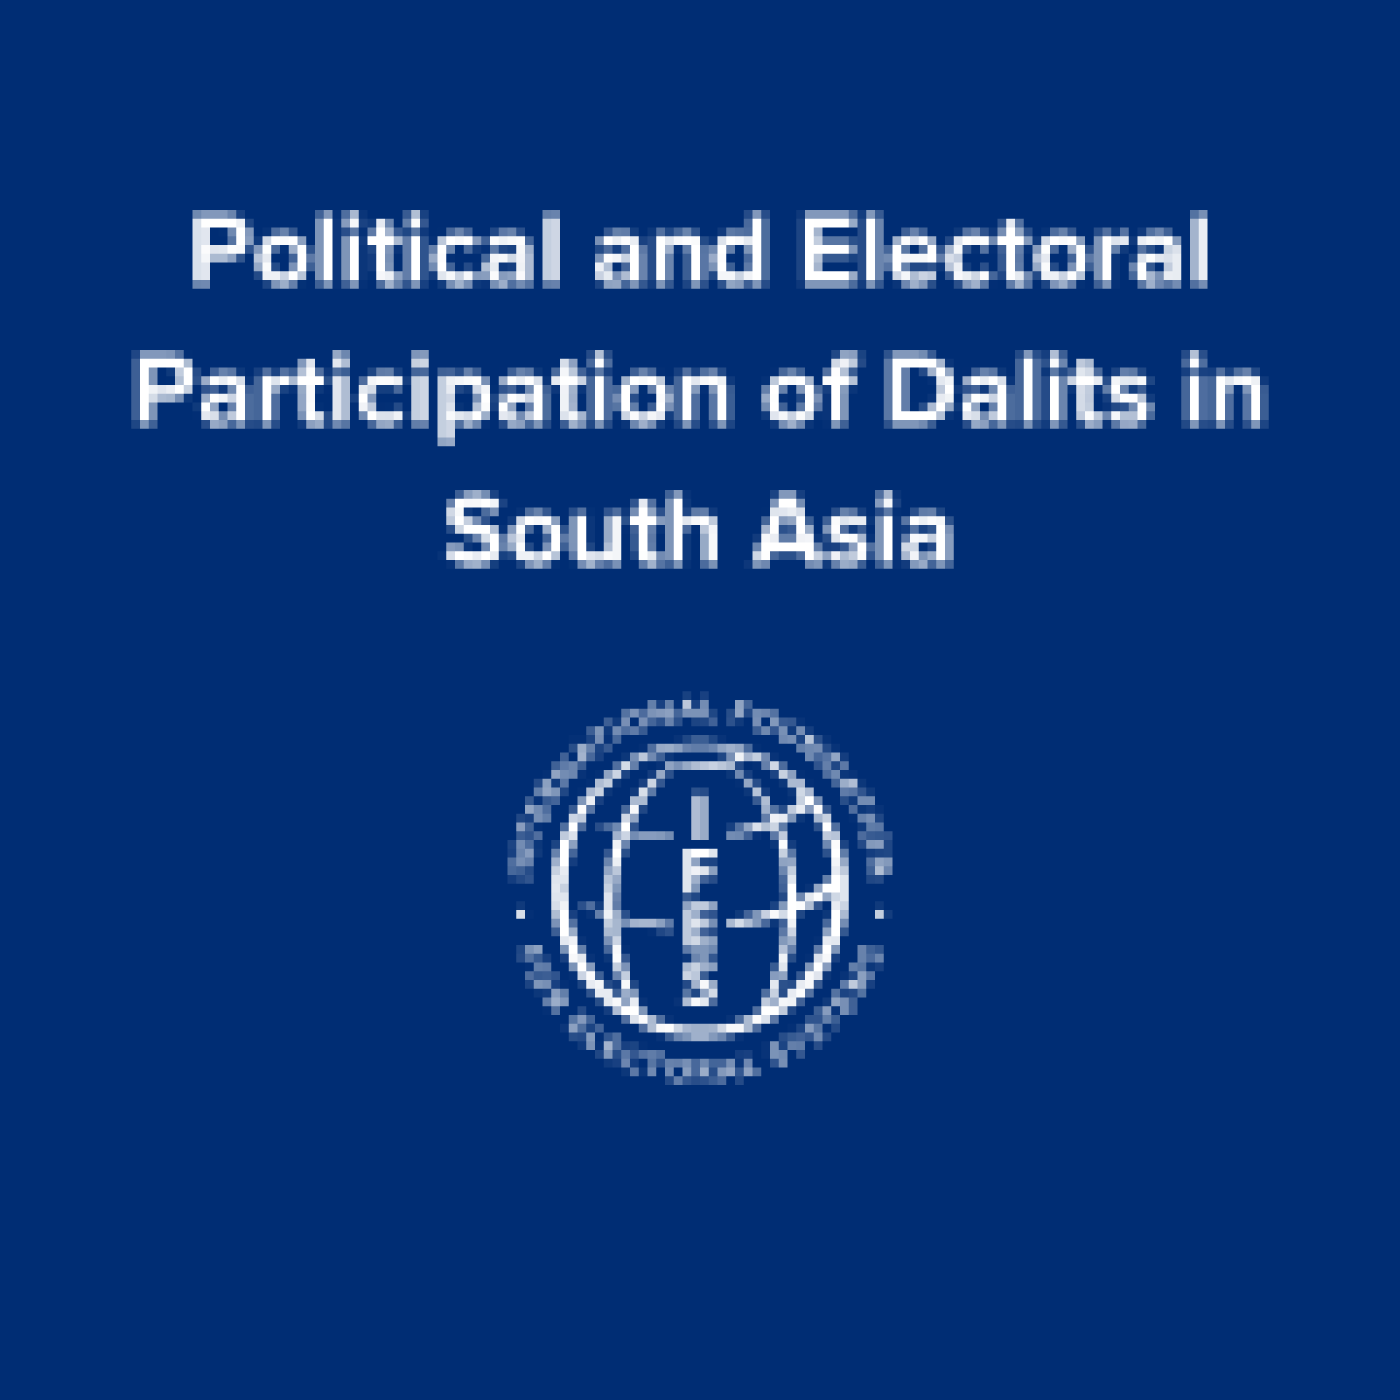 Political and Electoral Participation of Dalits in South Asia